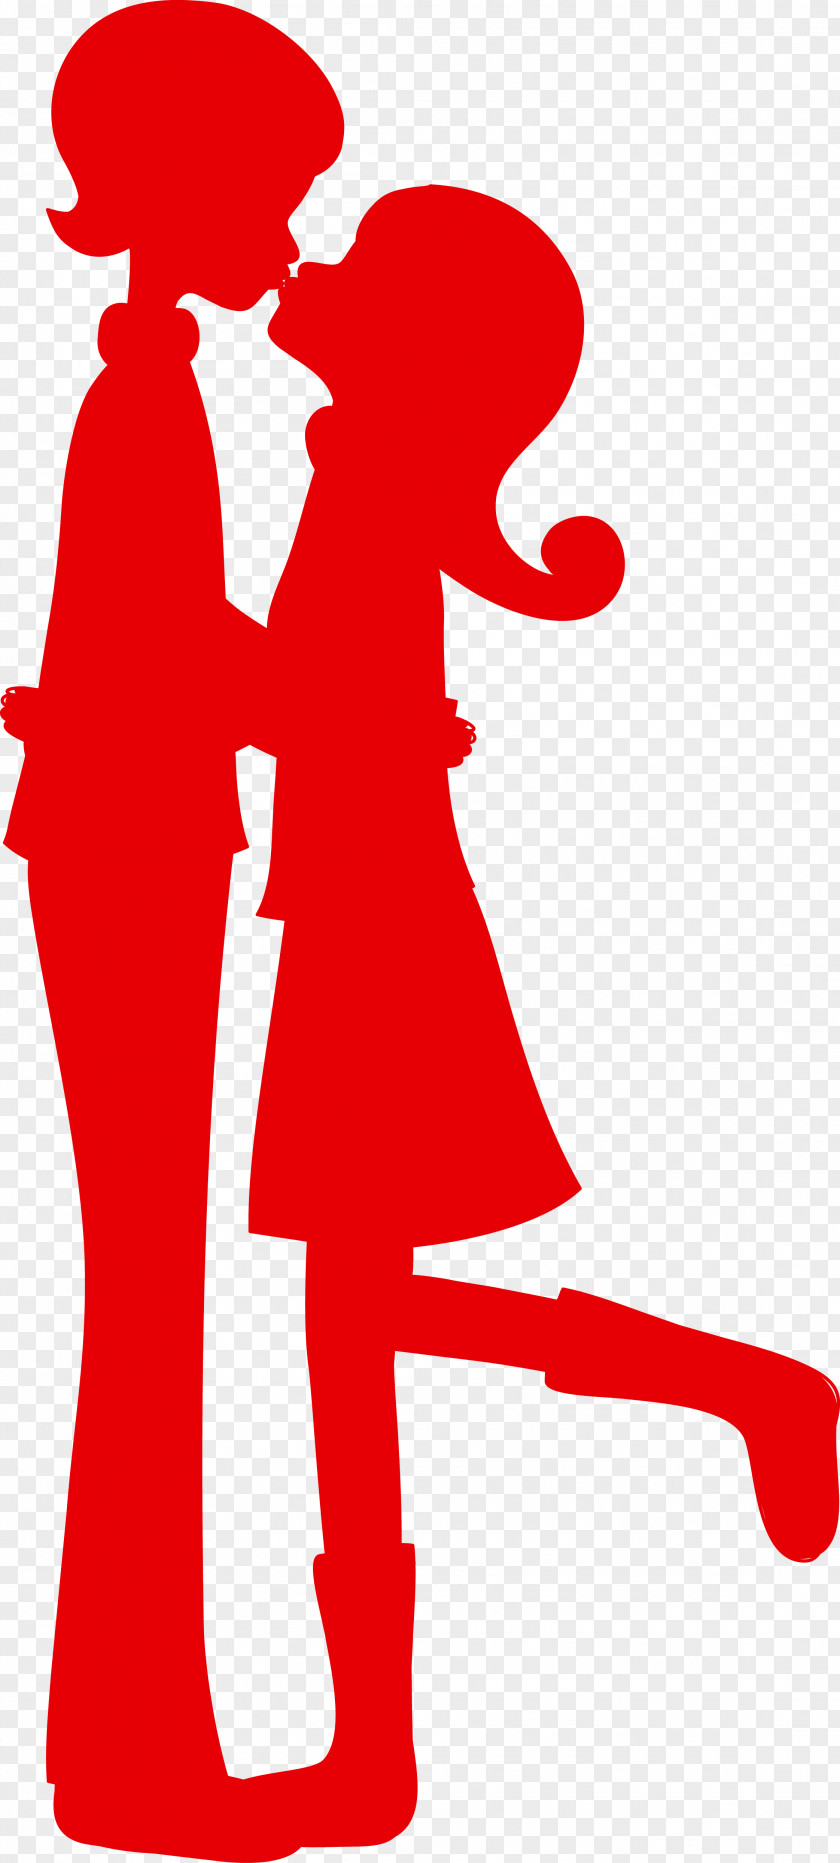 Two People Kissing Couple Euclidean Vector Clip Art PNG